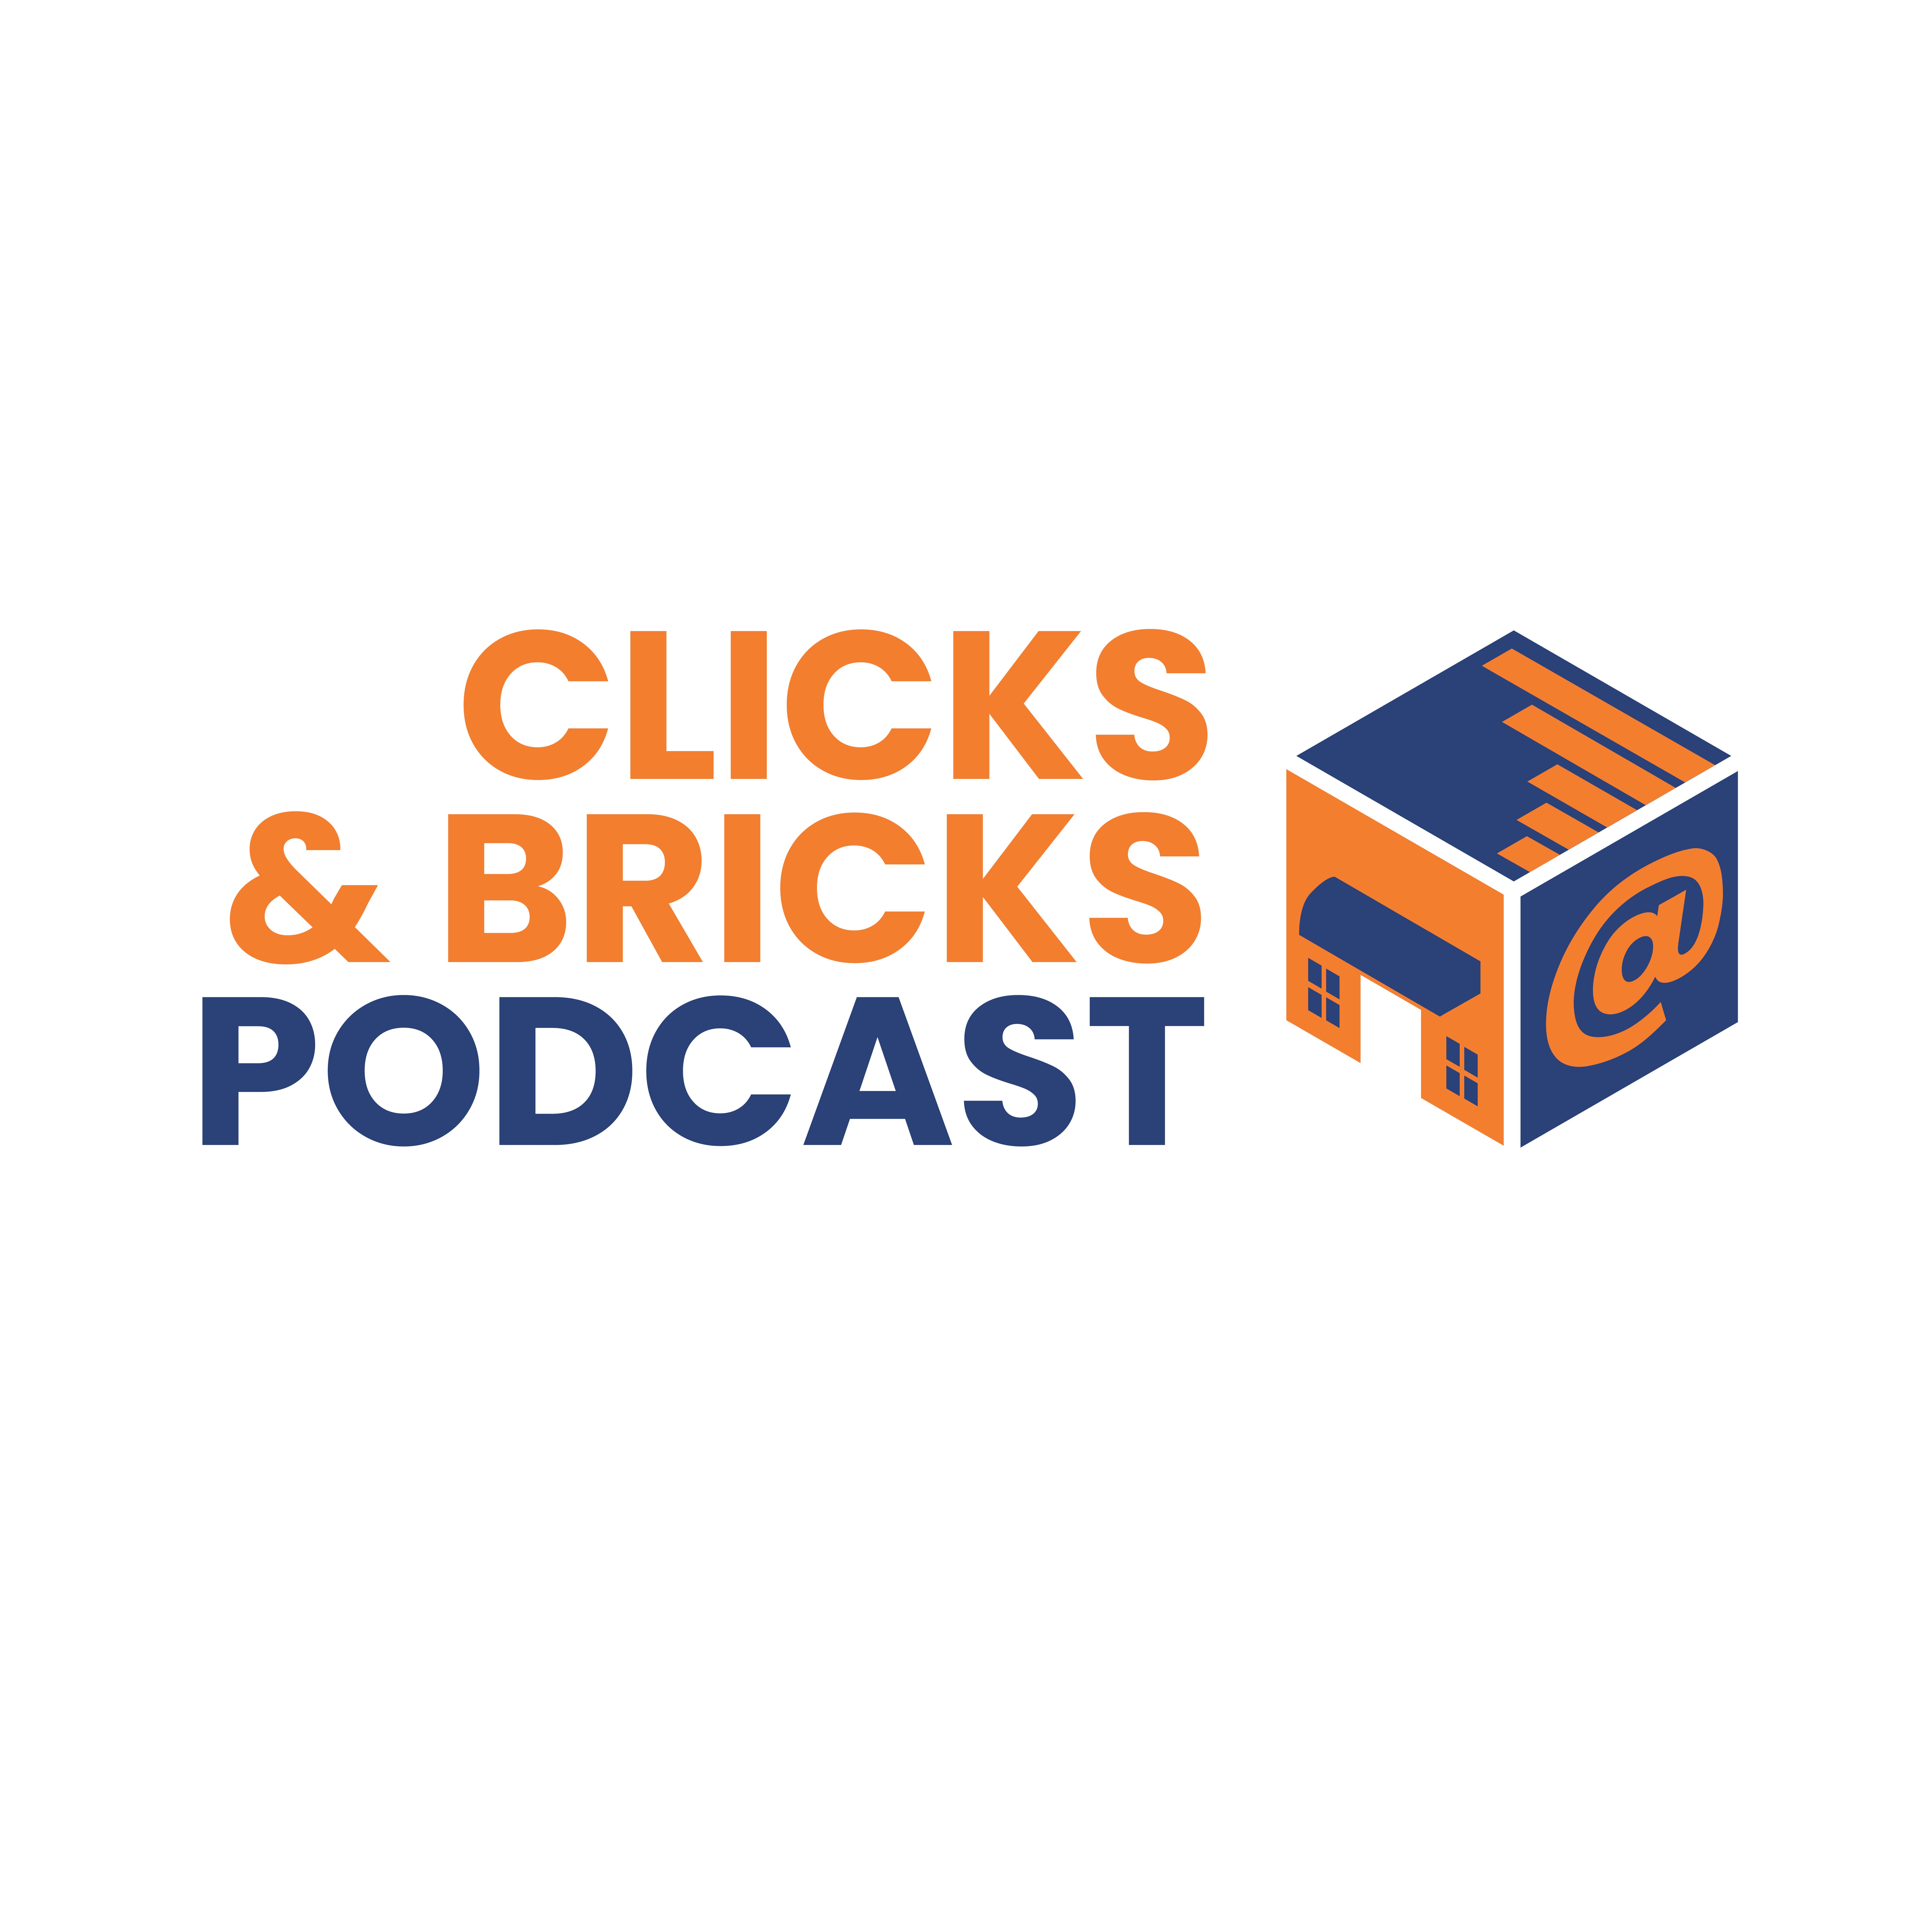 Clicks and Bricks Announces Interview with Melissa Rose from Brick & Mortar Visibility